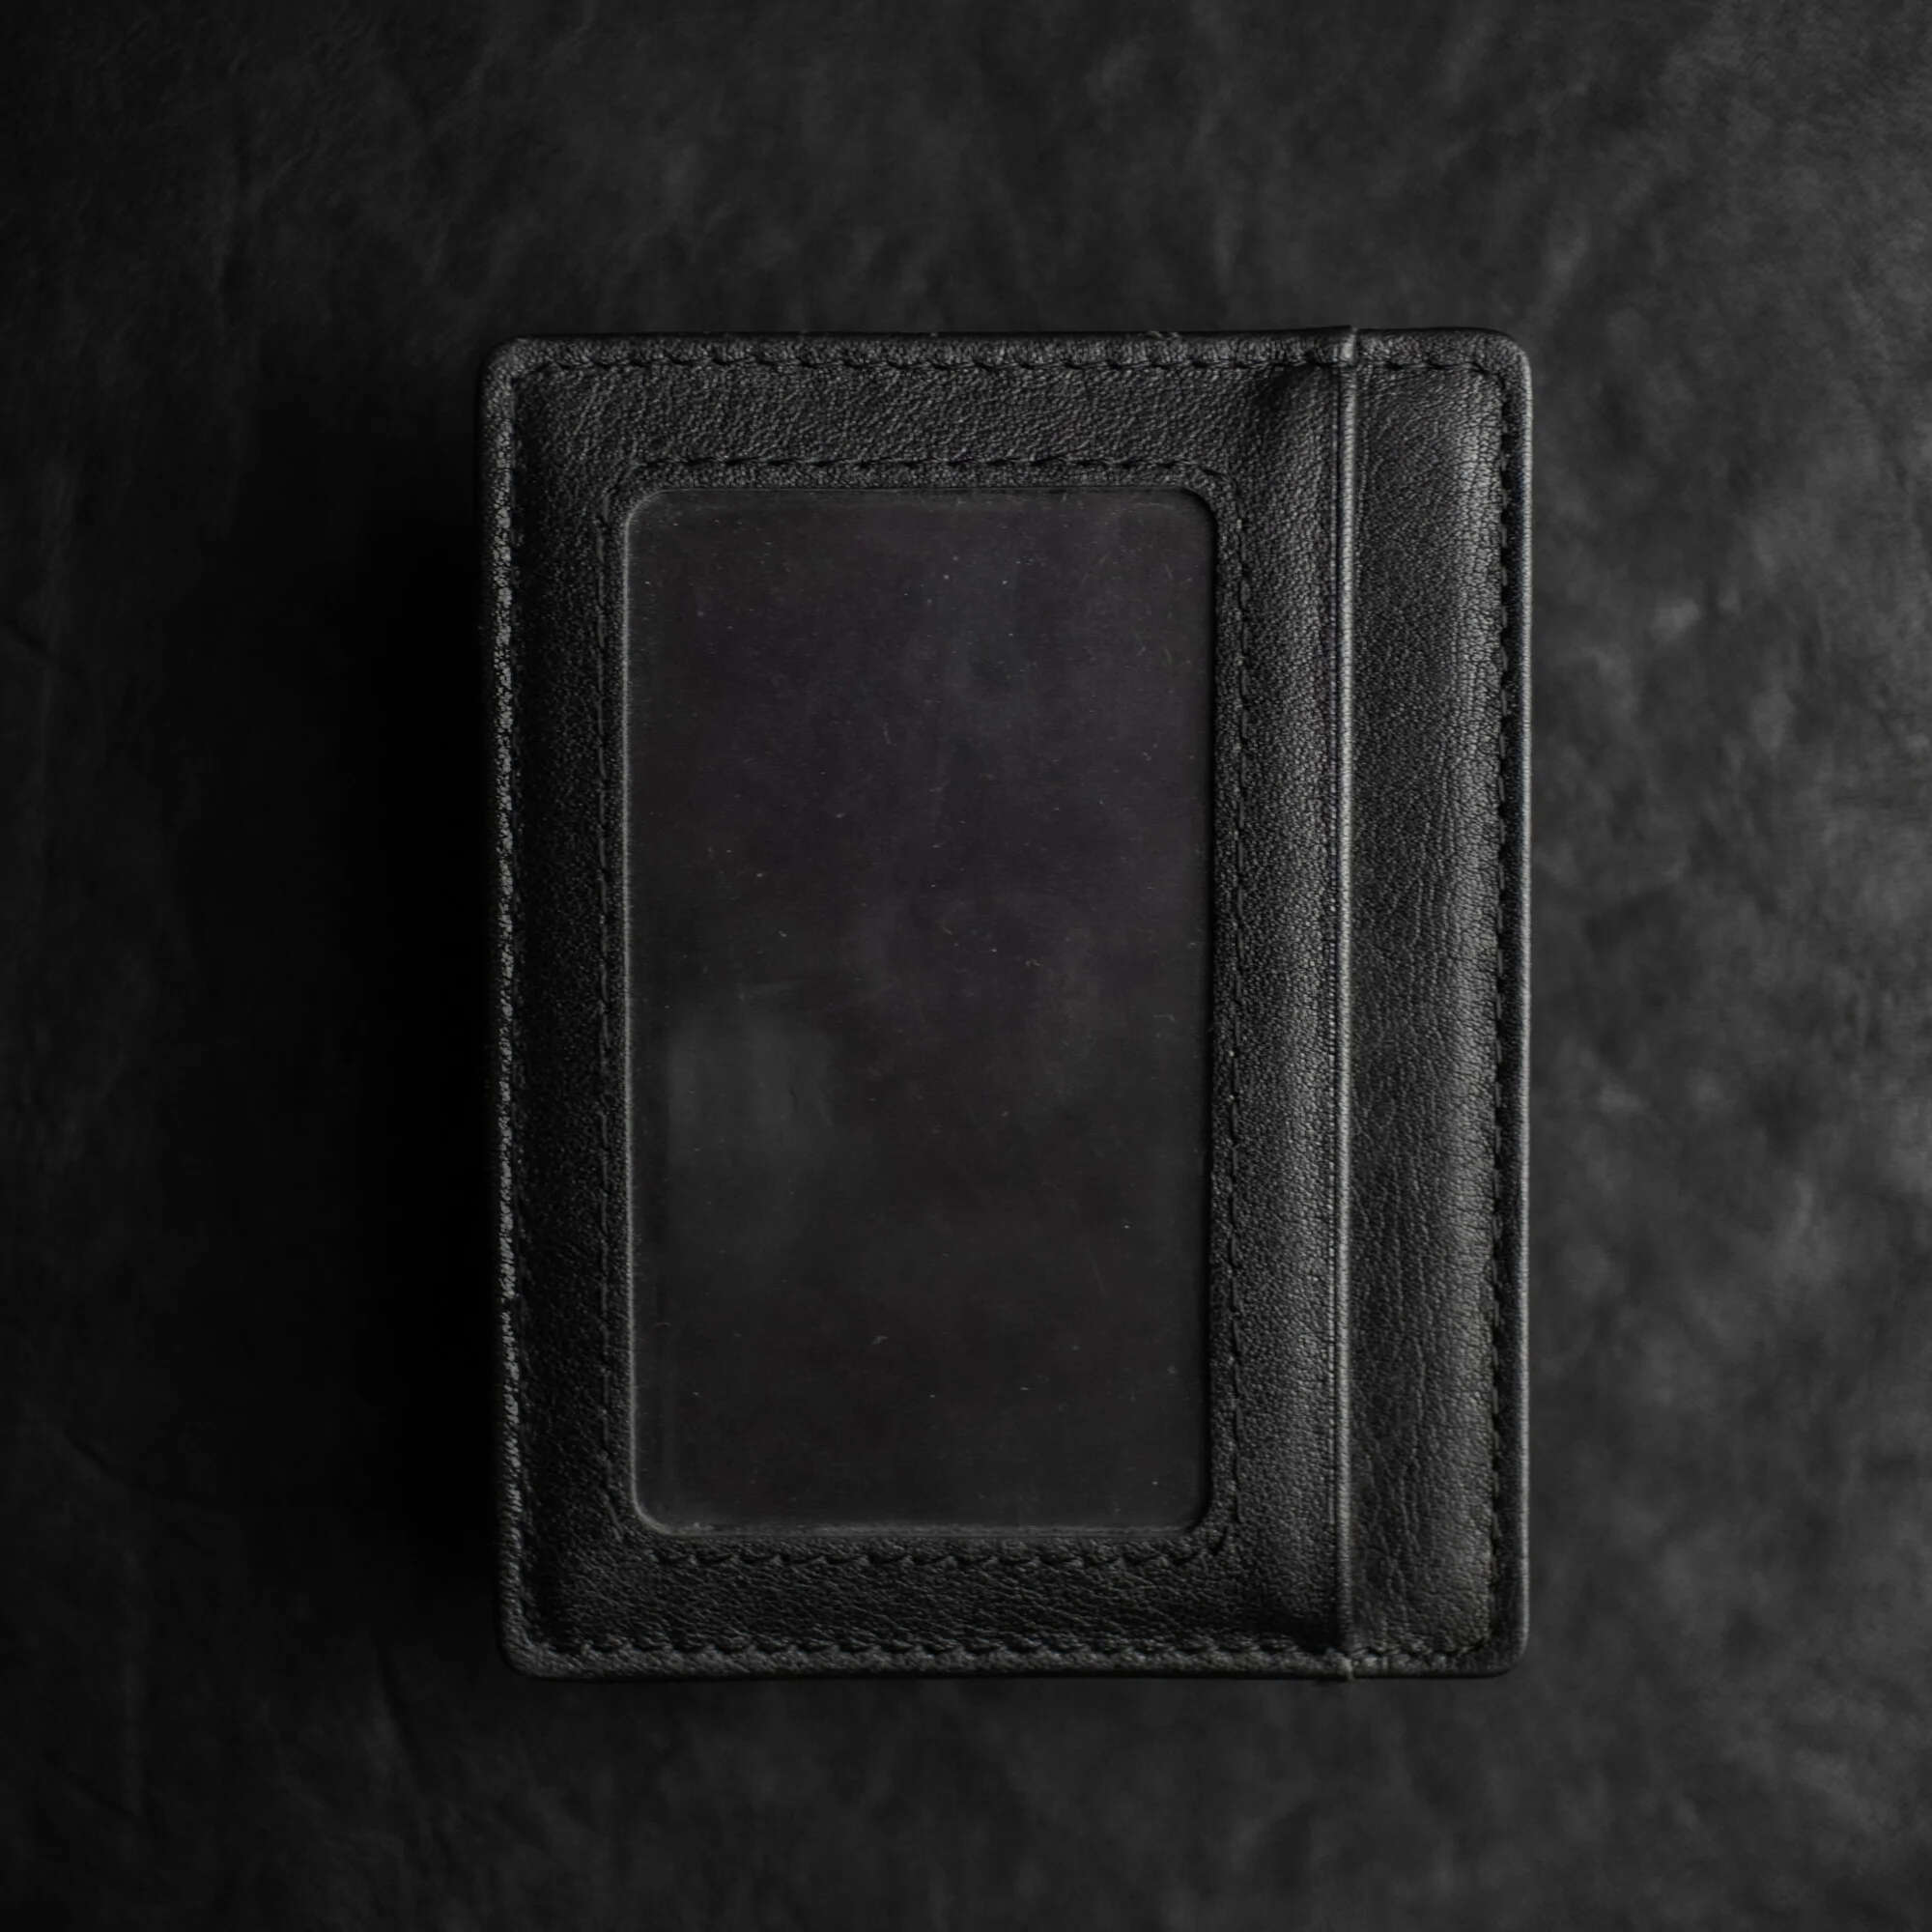 Black Shadow Wallet by Dee Christopher on black surface showing ID Window